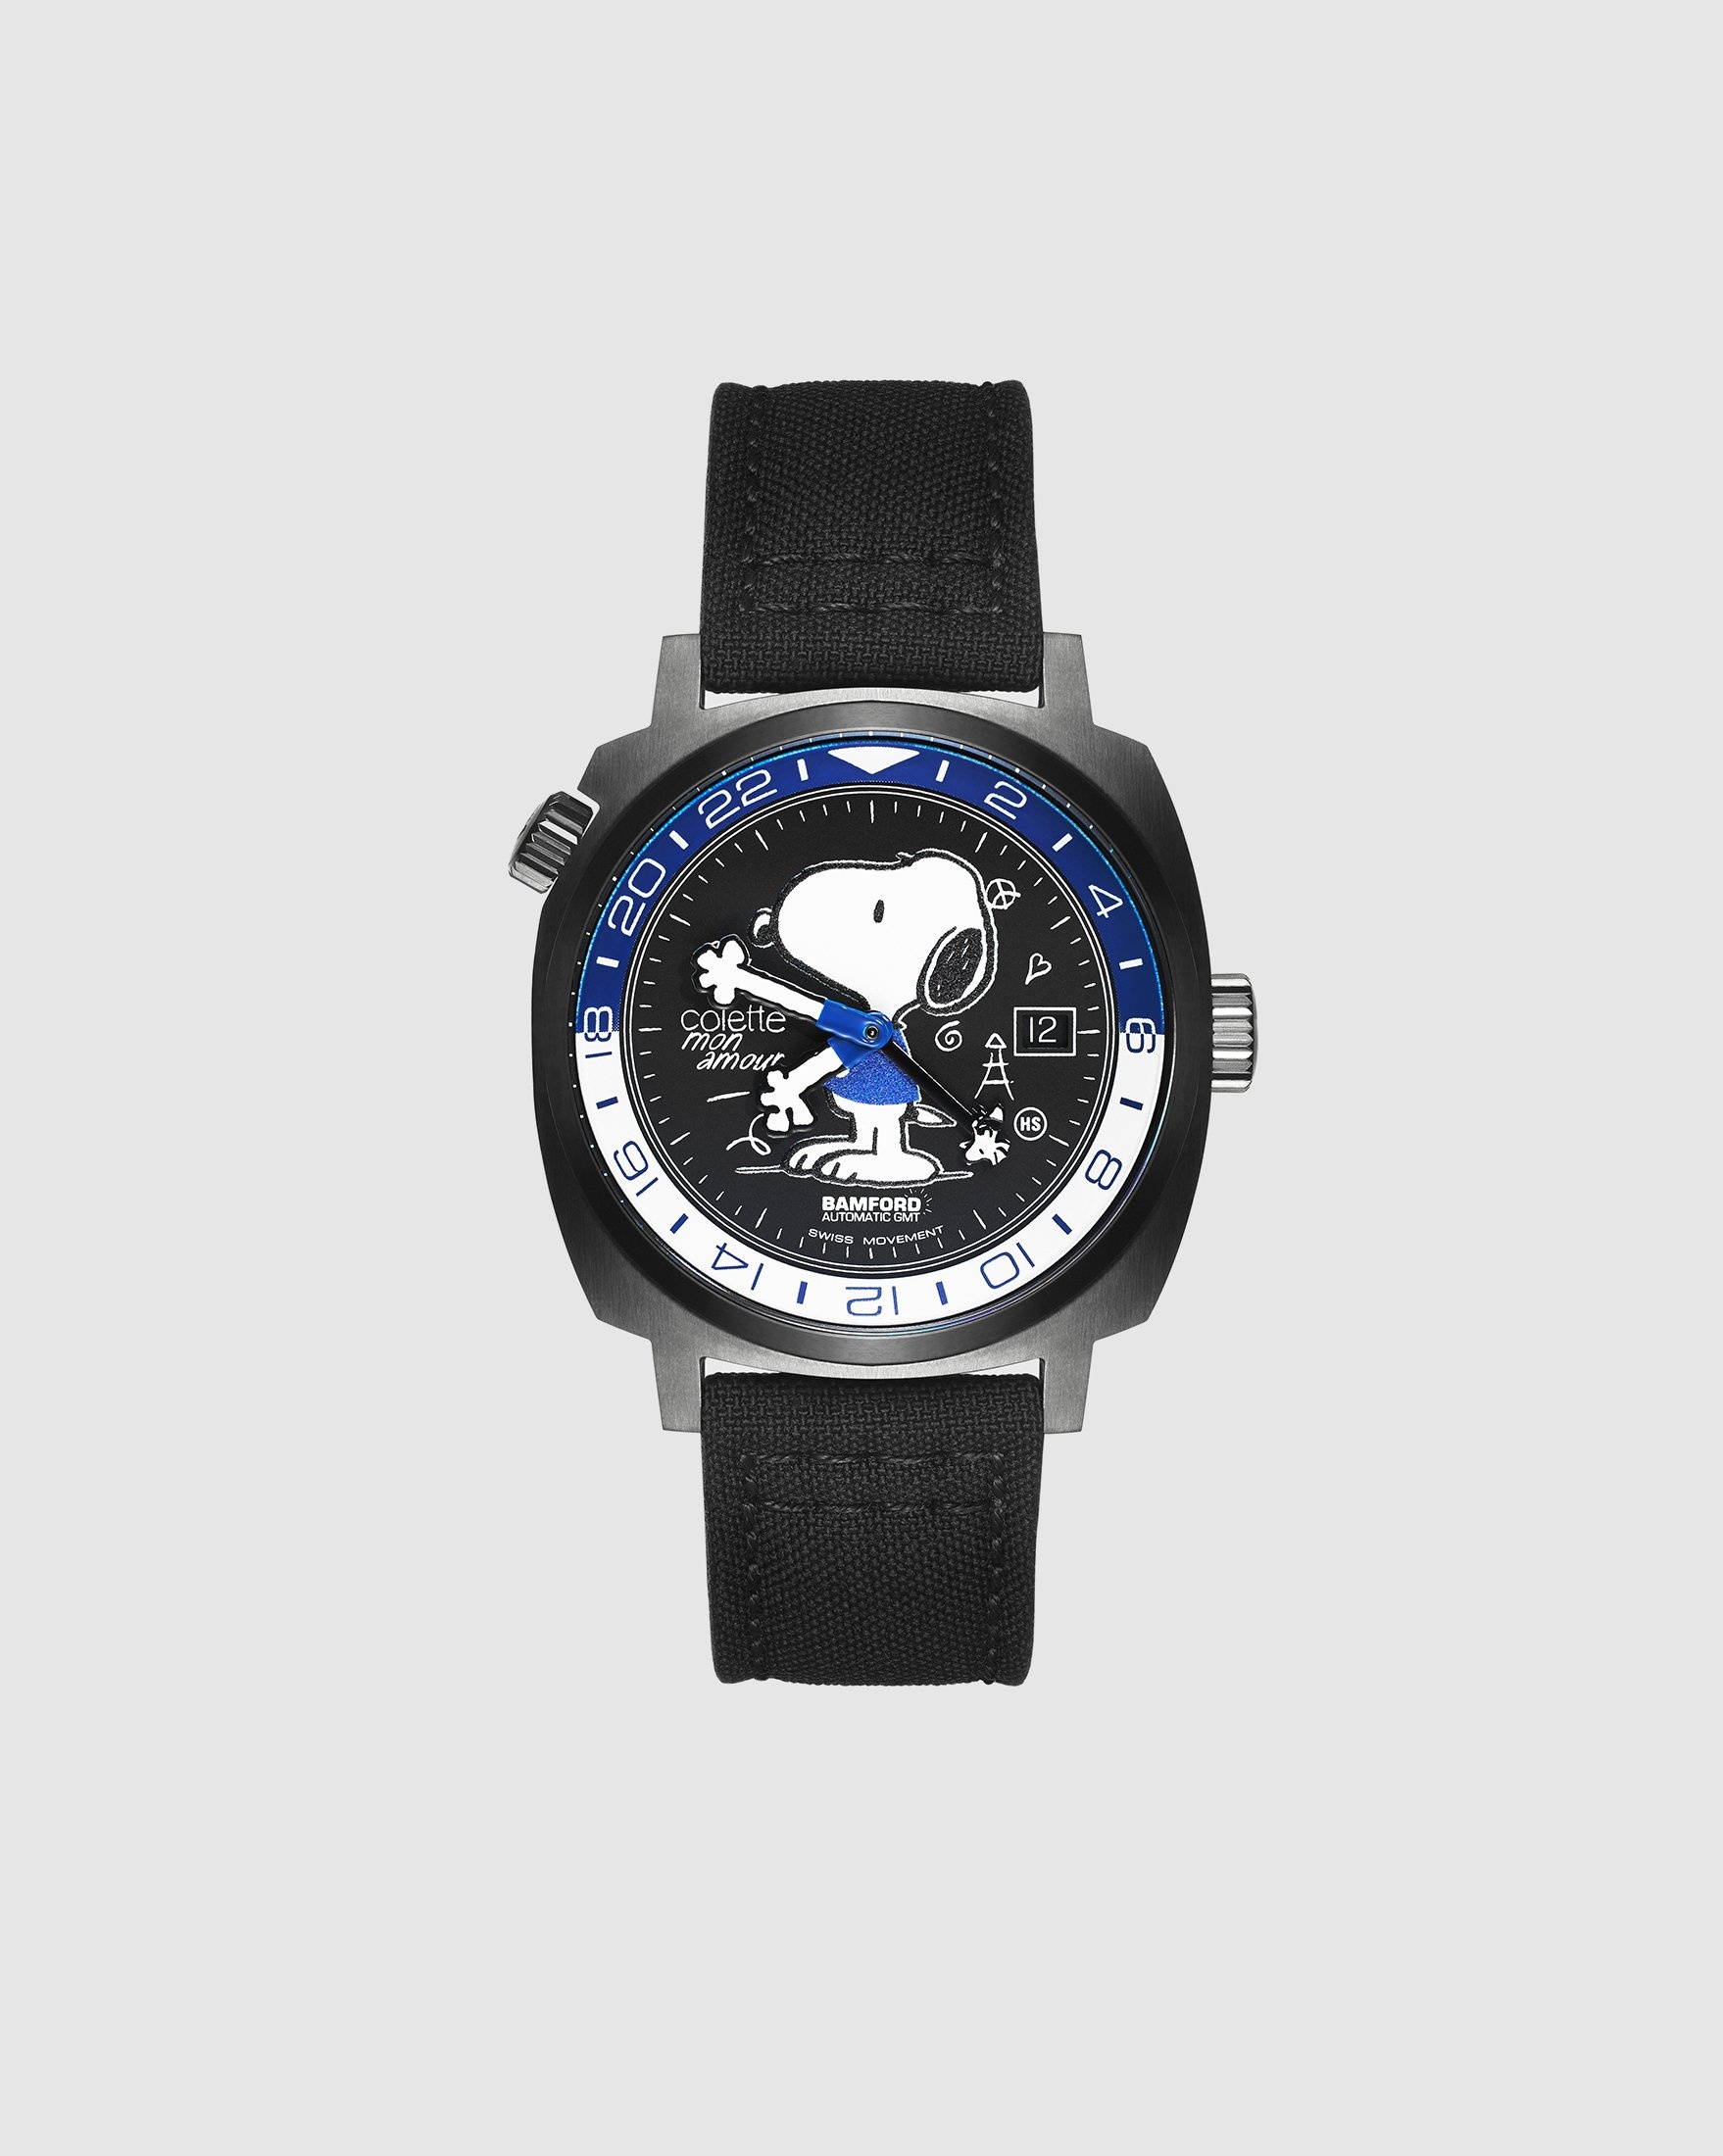 Colette Mon Amour – Bamford Snoopy Watch Black - Automatic - Black - Image 1